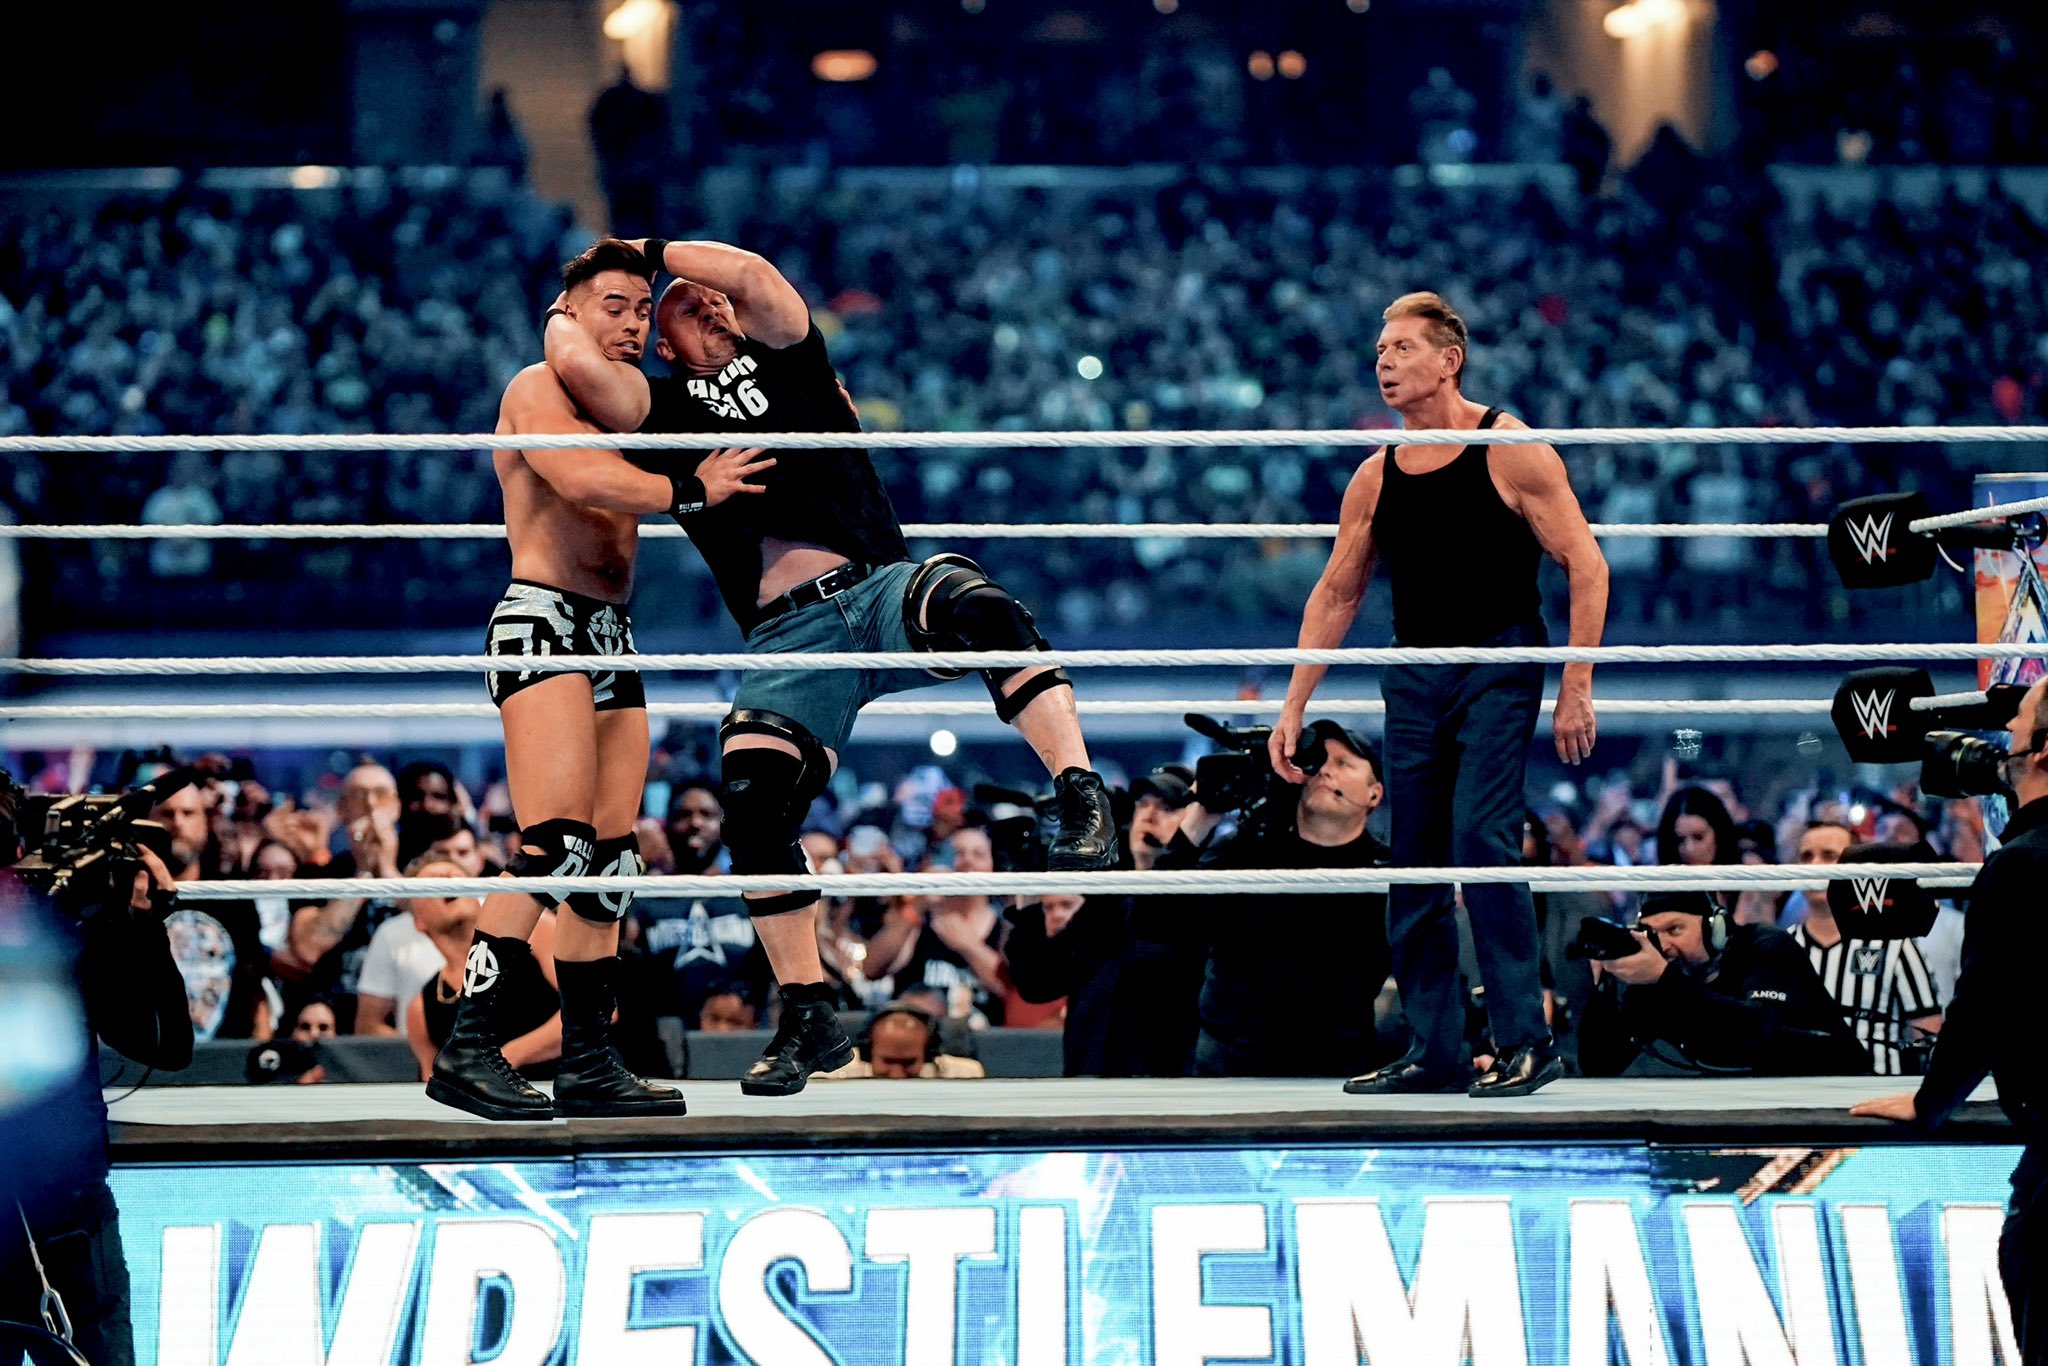 Steve Austin applies the Stunner to Austin Theory against Vince McMahon at WrestleMania 38